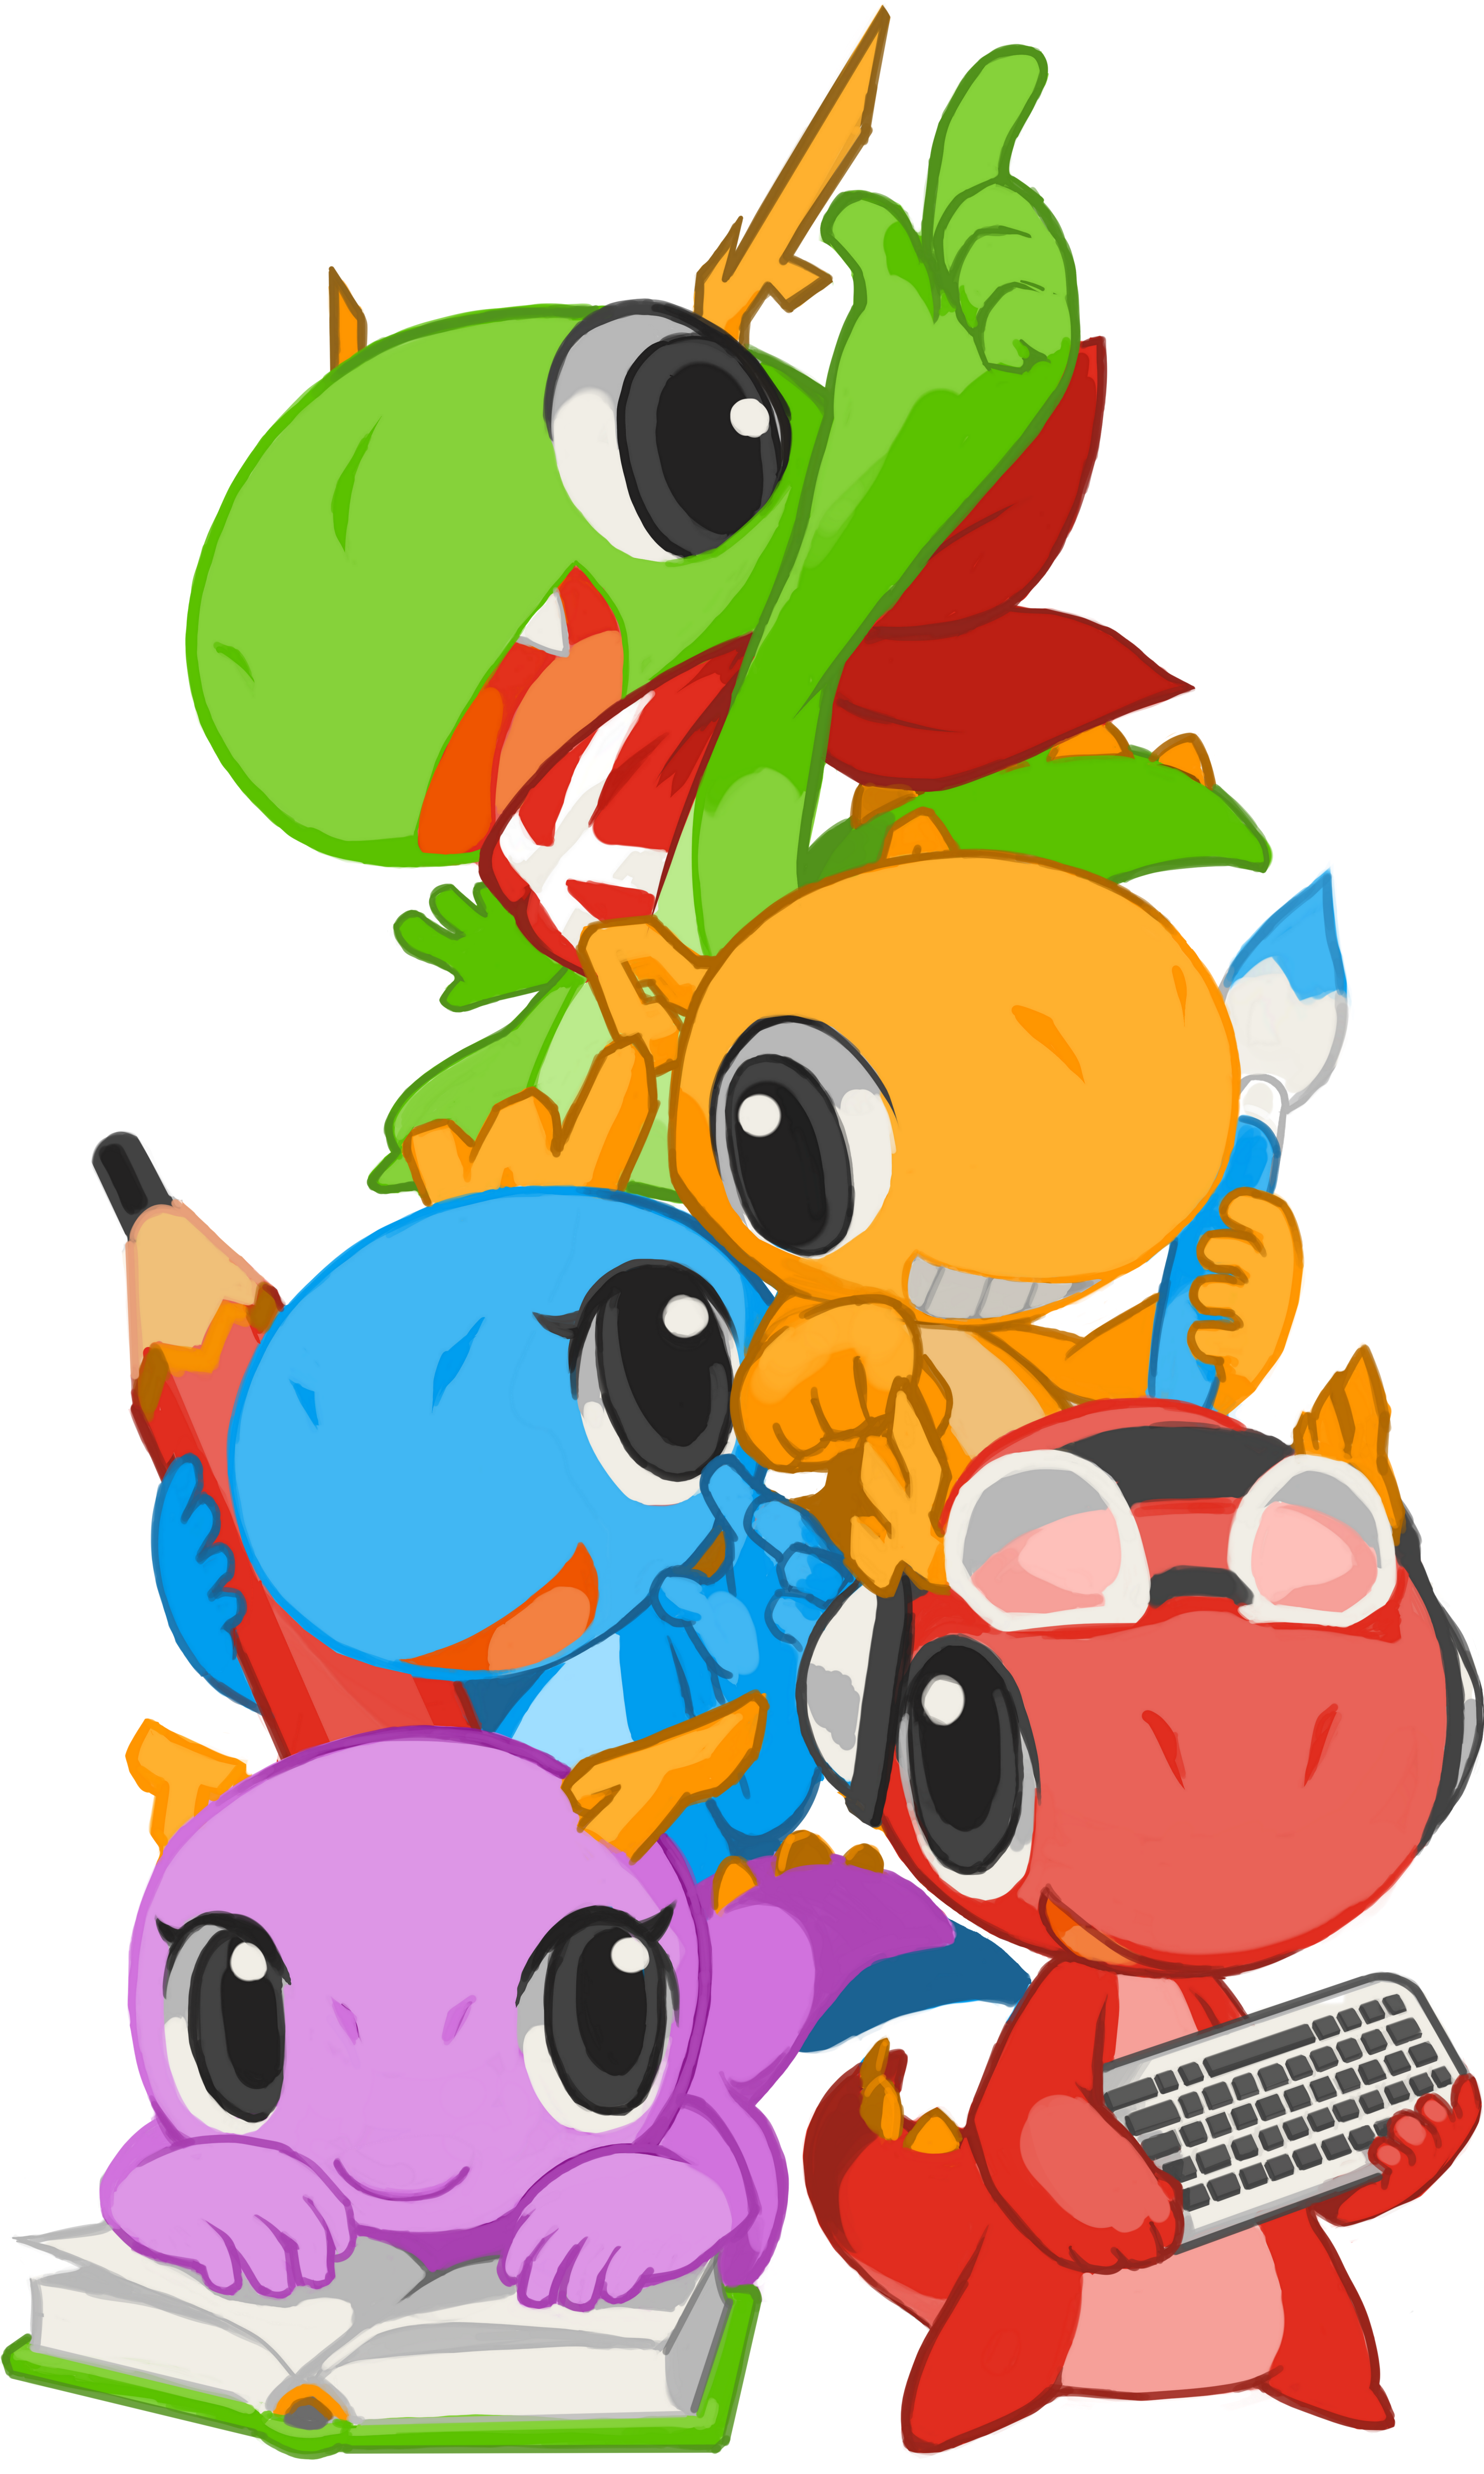 Konqi and friends; mascots of the KDE® family